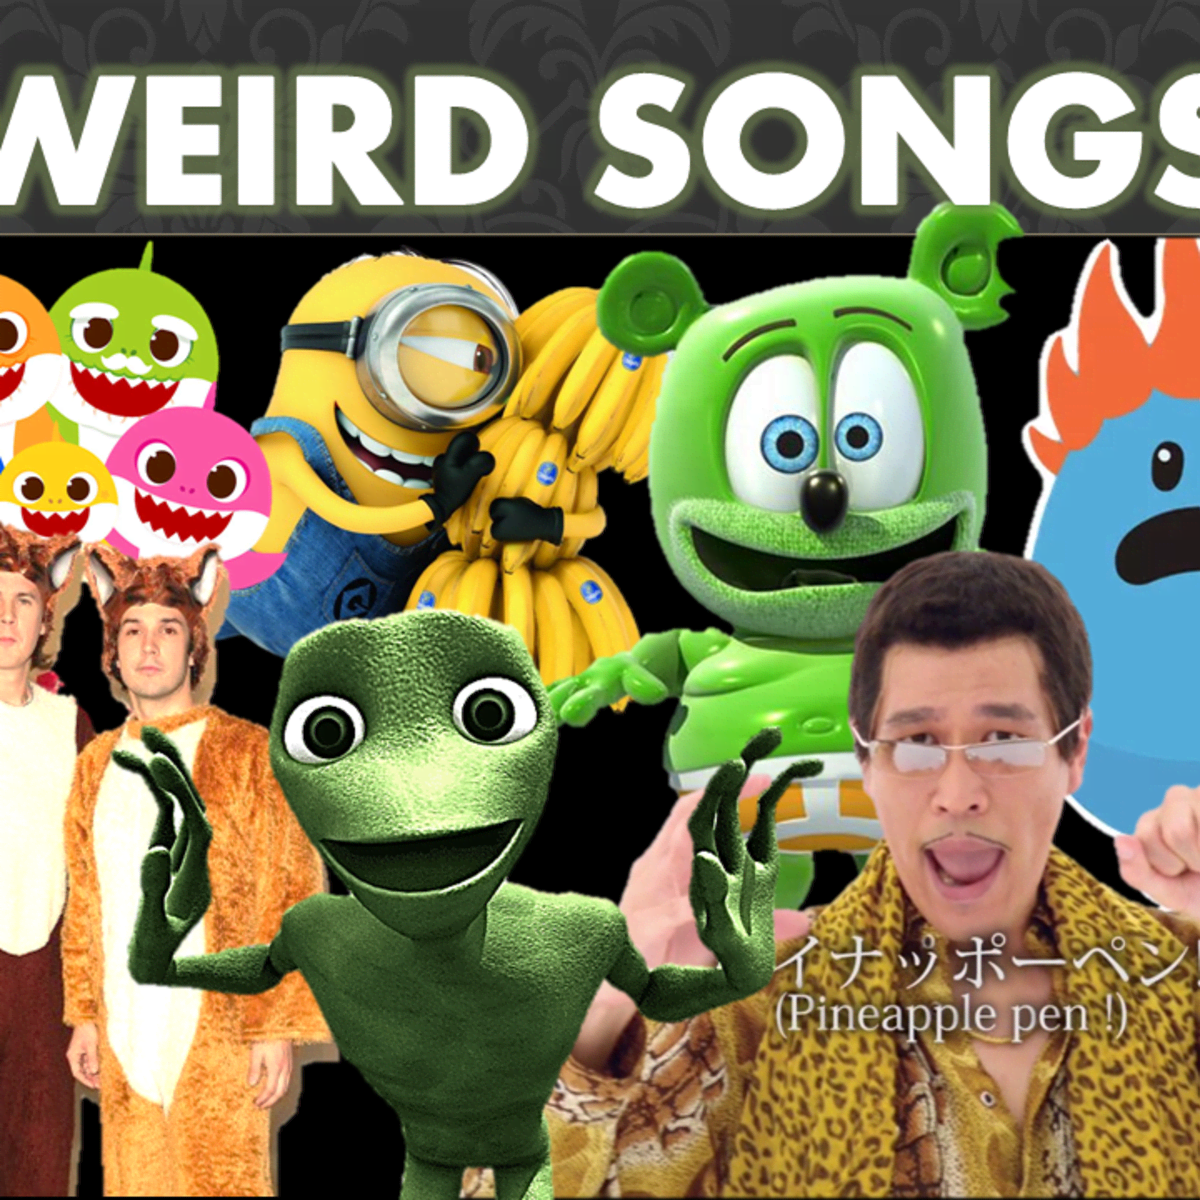 Weird Songs 39 Most Popular Weird Songs Of All Time Spinditty Music Crazy frog song lyrics by axel f official. weird songs 39 most popular weird